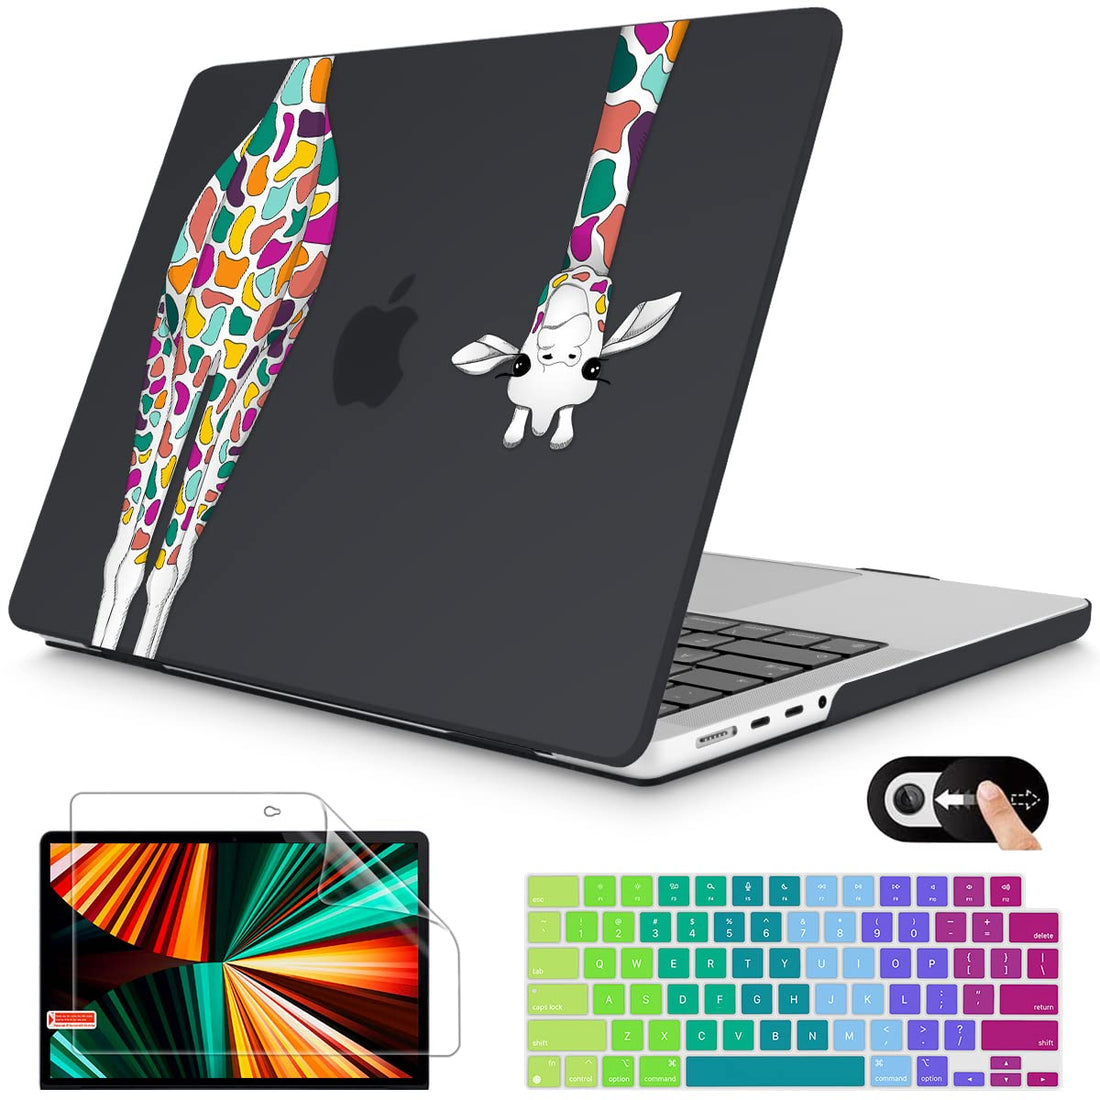 Mektron 2021 Newest for MacBook Pro 16 inch Case A2485,Matte Colorful Giraffe Soft Touch Plastic Laptop Hard Cover Keyboard Skin Screen Protector Compatible with MacBook Pro 16" M1 Pro/Max Chip, Black